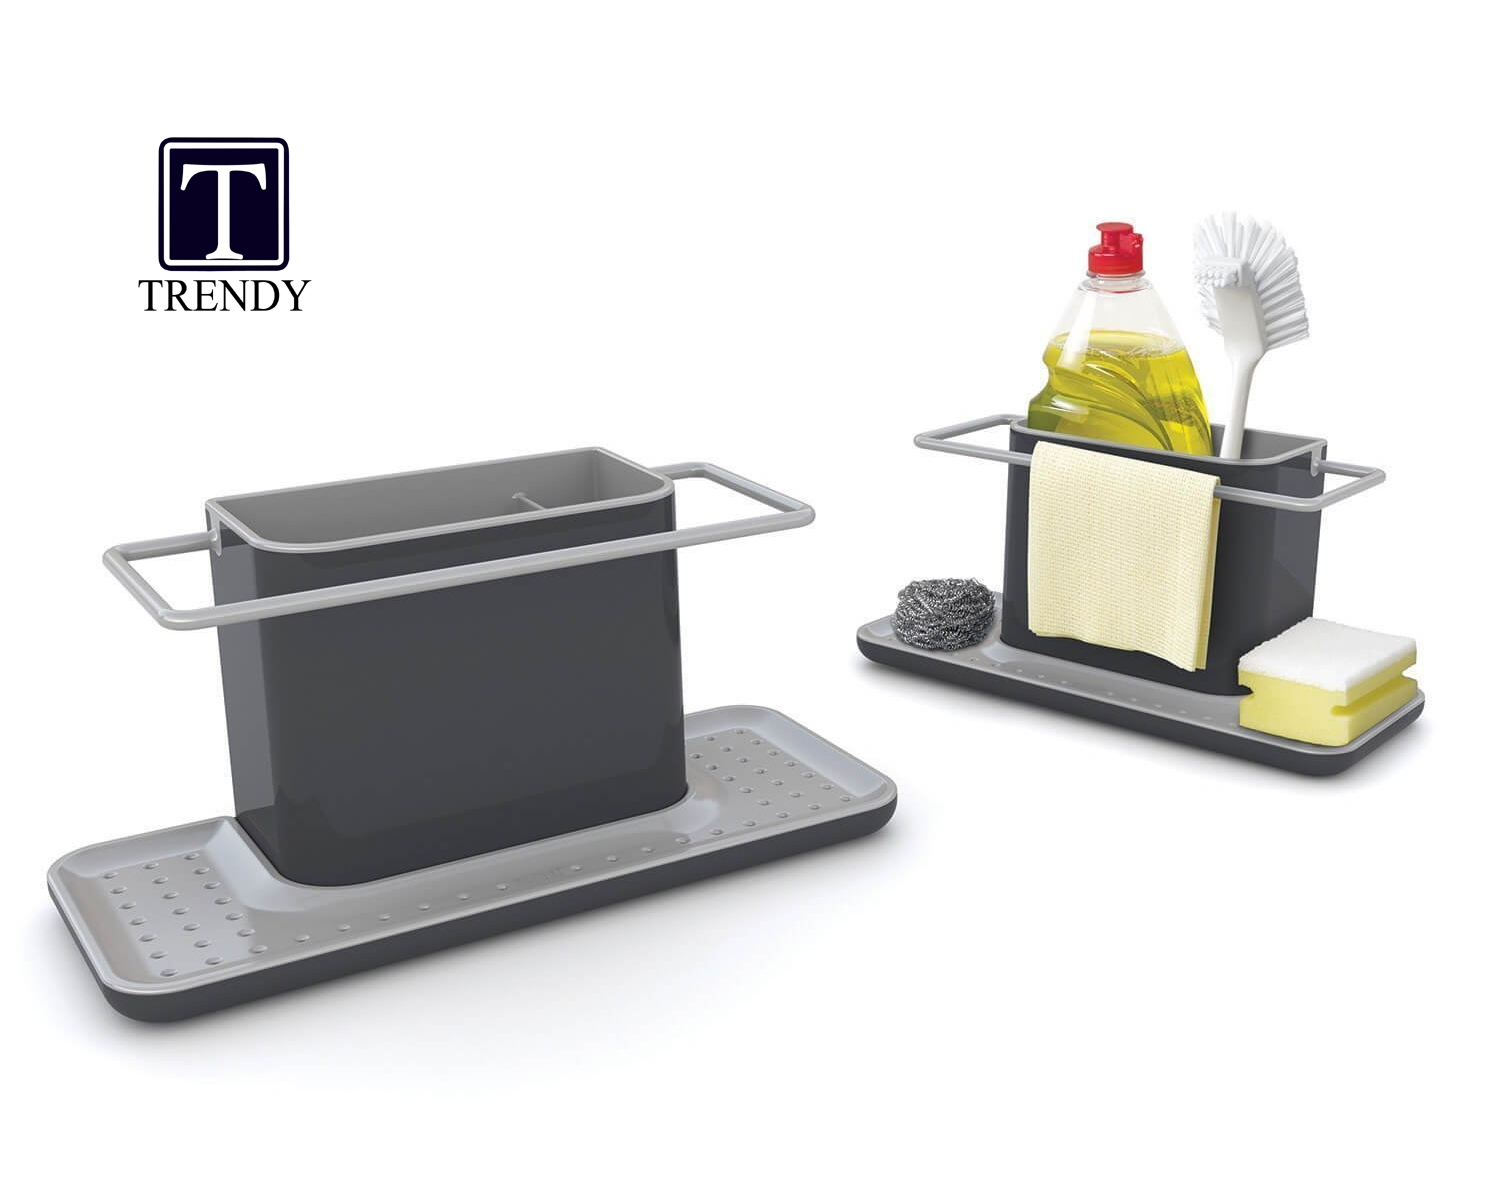 soap and sponge holders in kitchen sink